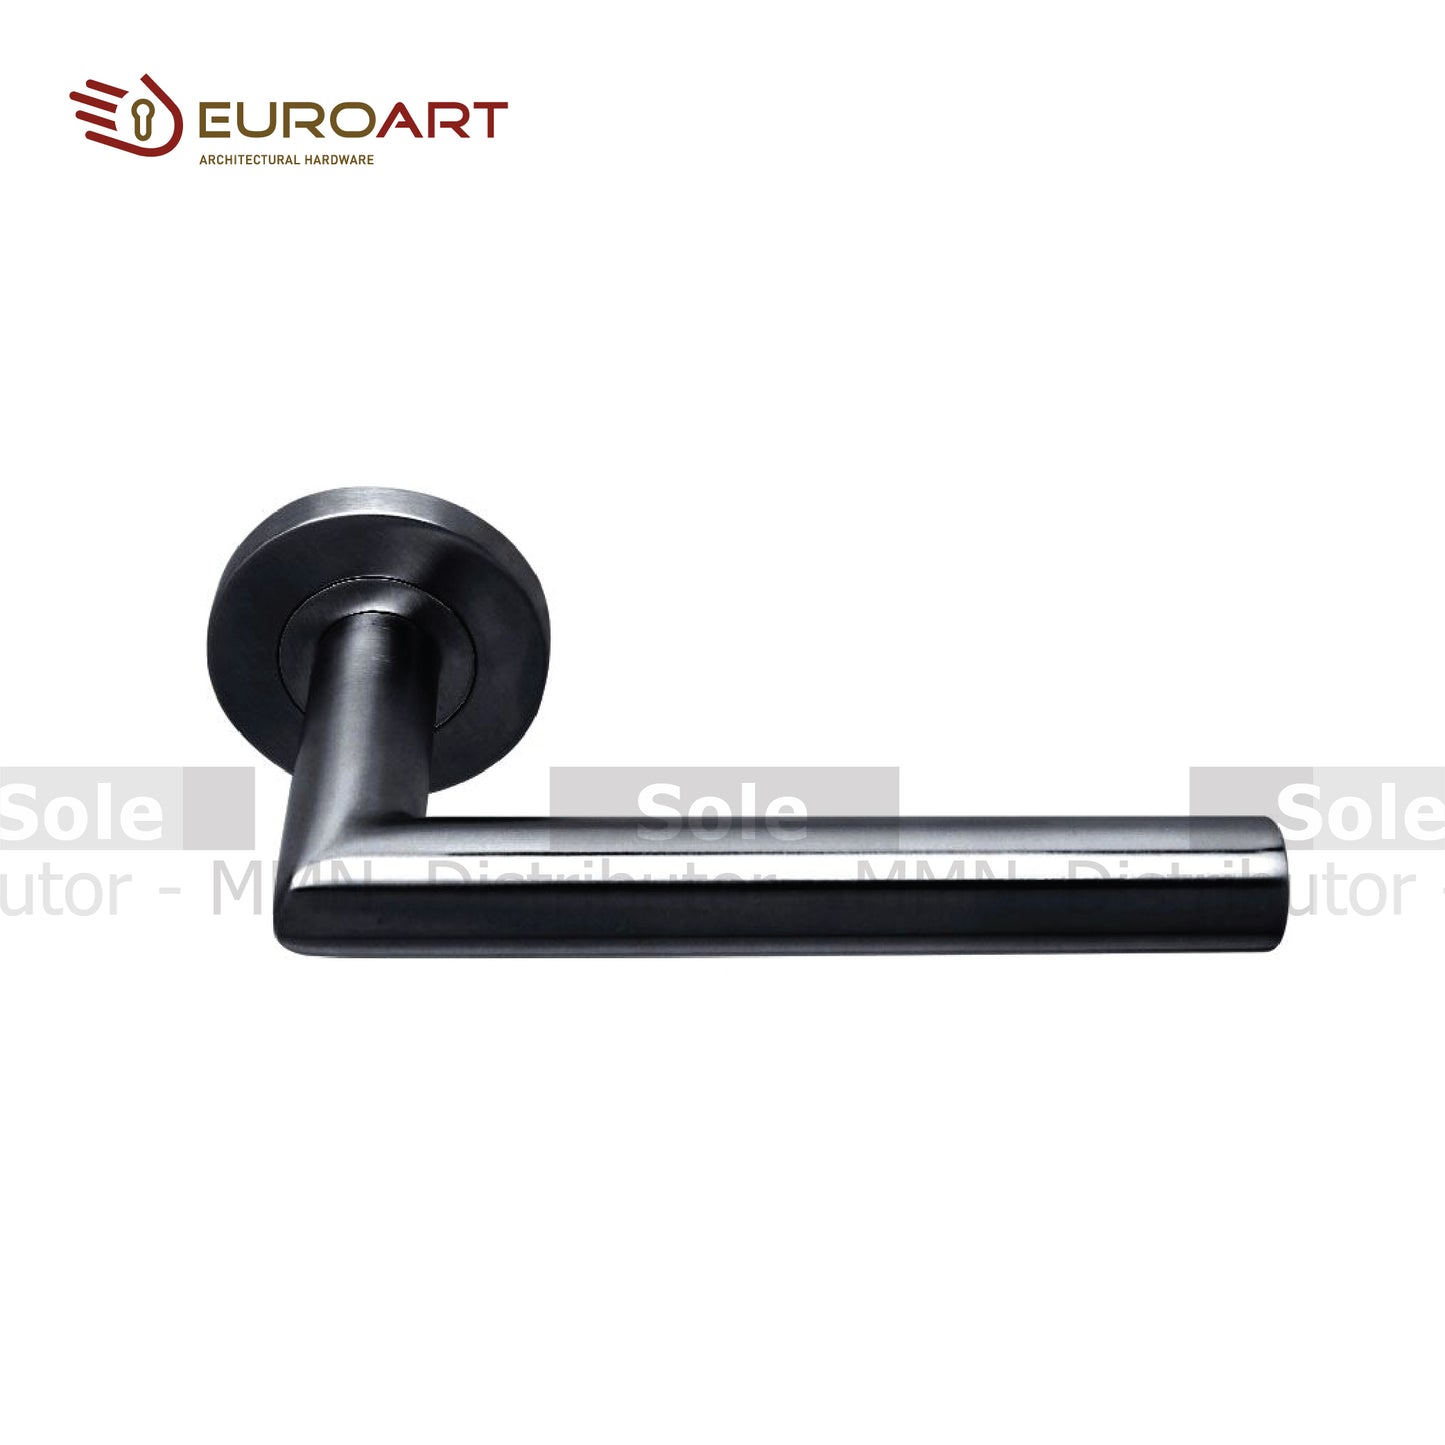 EuroArt Tubular Lever Handle With Escutcheons 19mm Stainless Steel & Matte Black +EES001SS, BL/PVD - LRS102